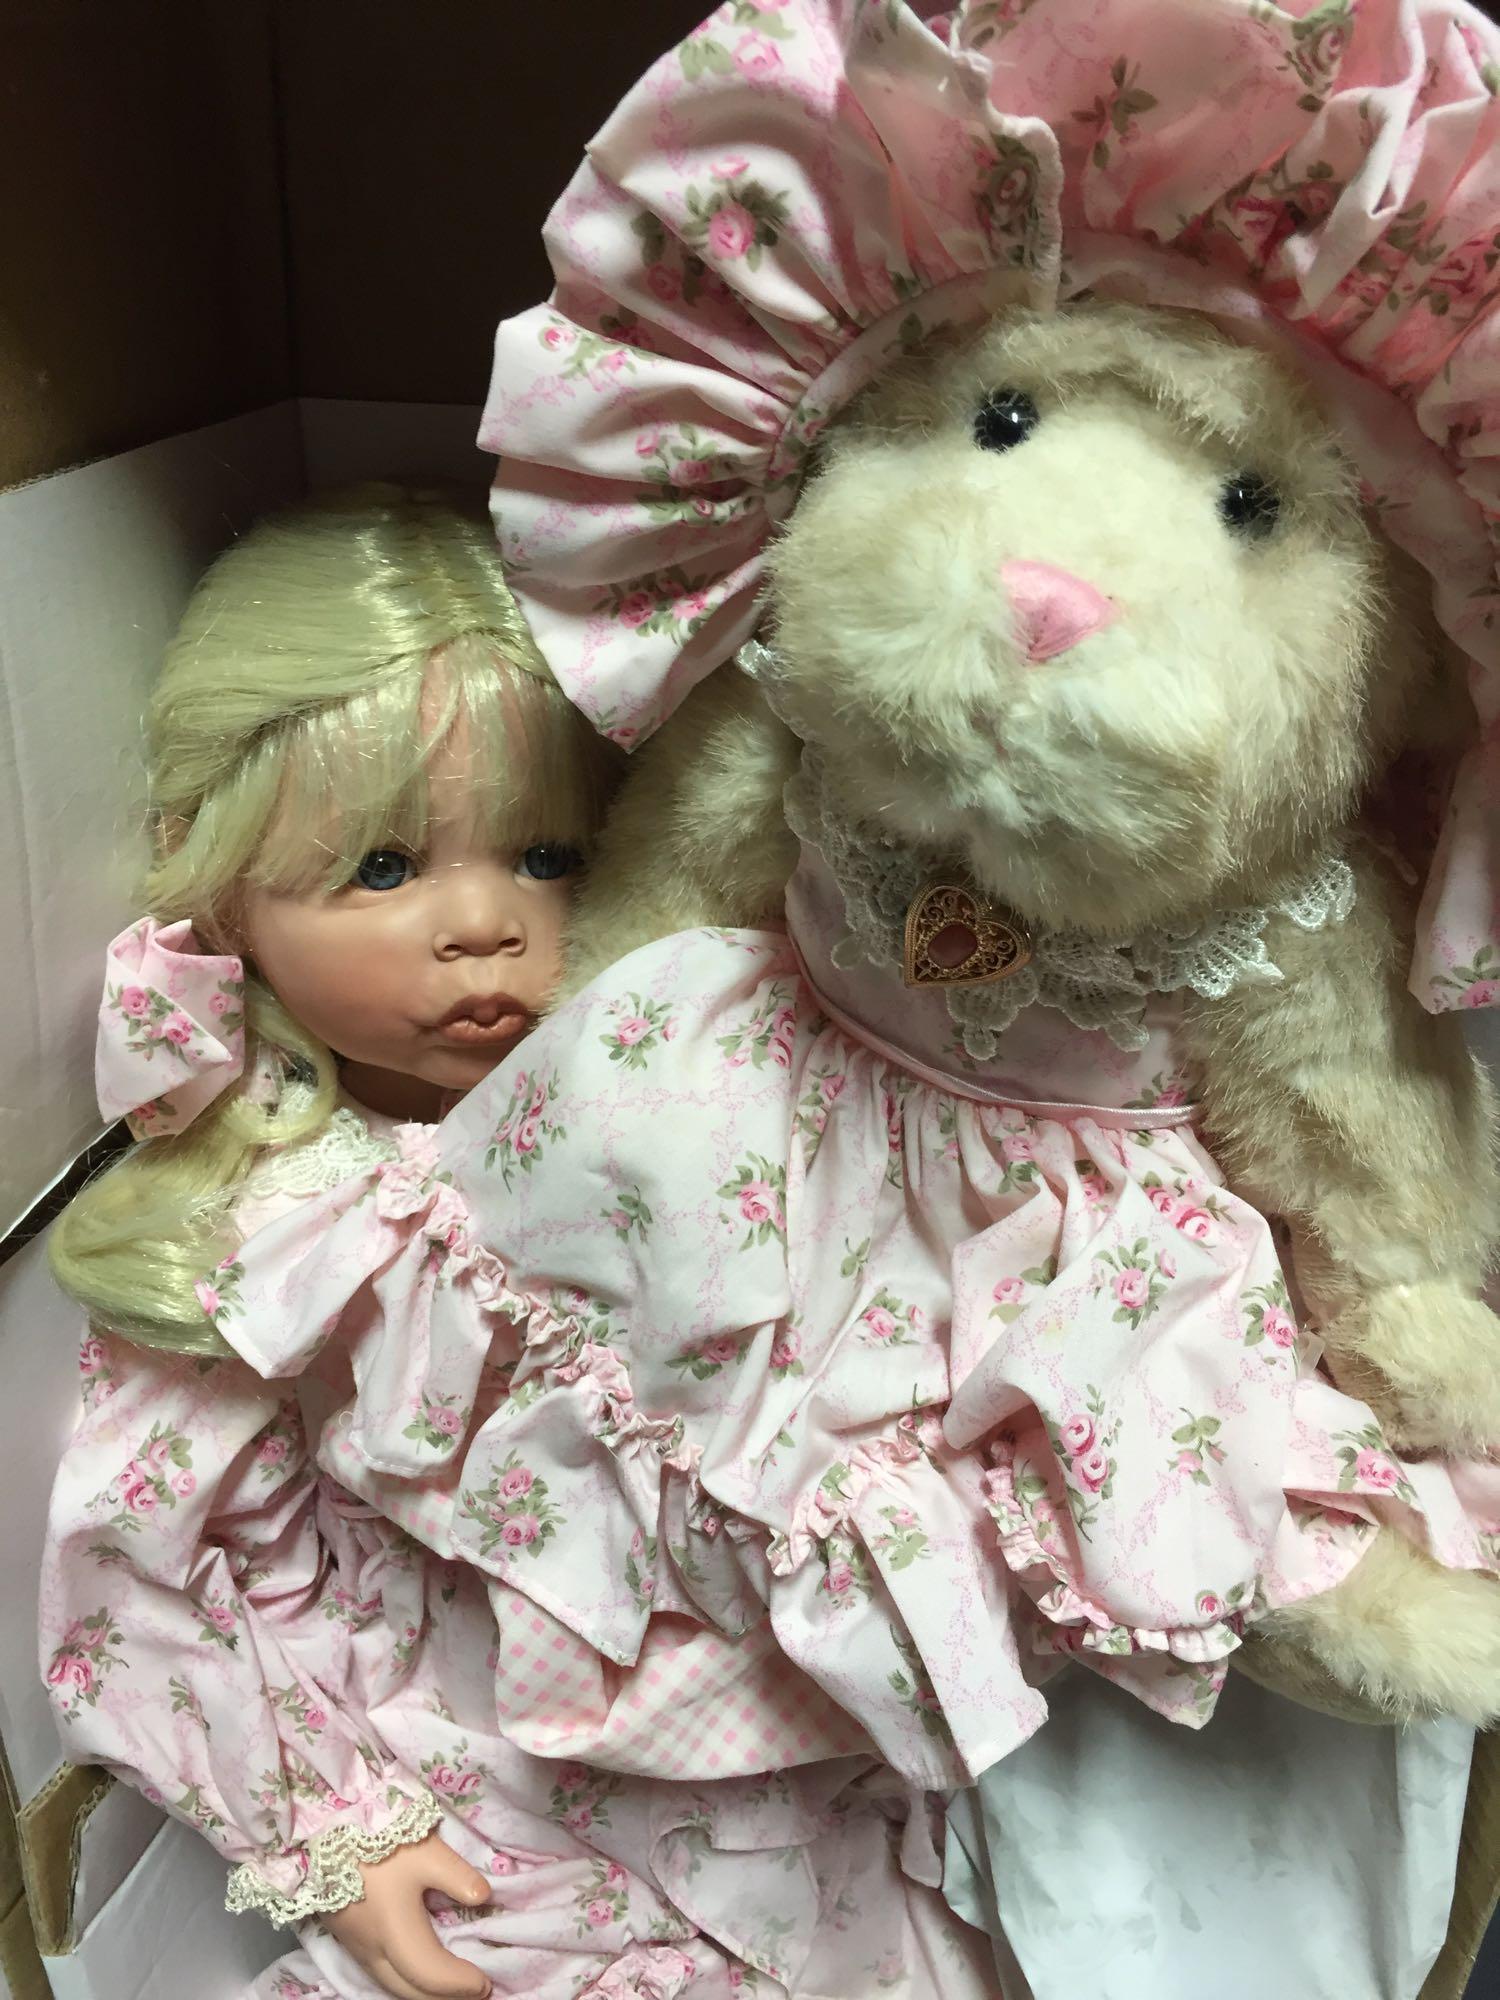 The Doll Maker and Friends- Lot of 2 Dolls